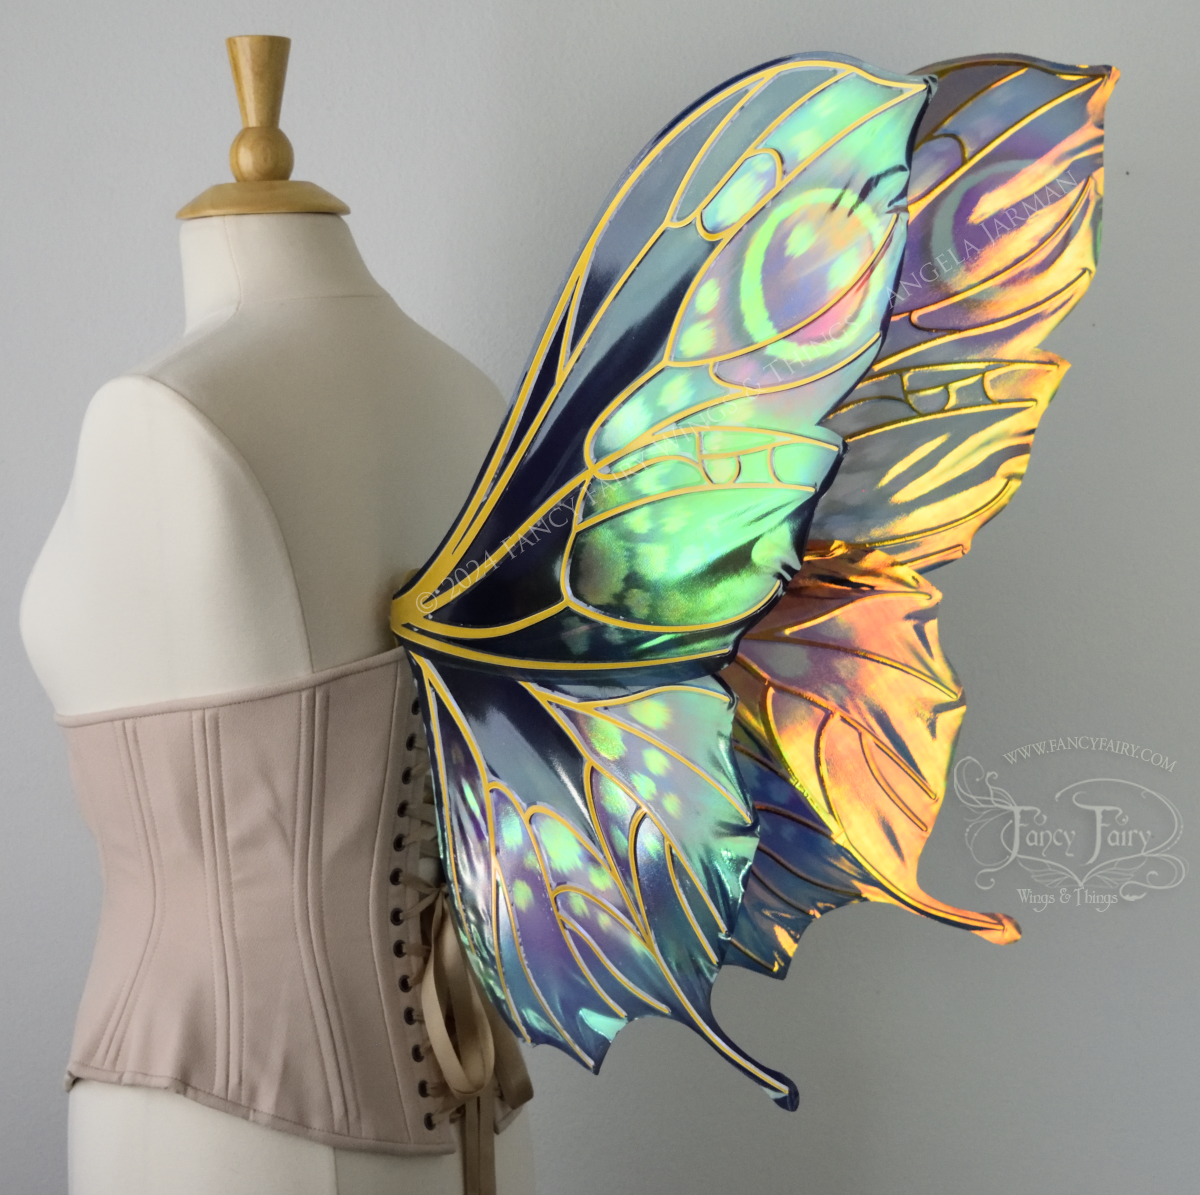 Back 3/4 view of butterfly shaped iridescent wings in shades of teal with pink and lavender accents with gold veins, worn on a dressform